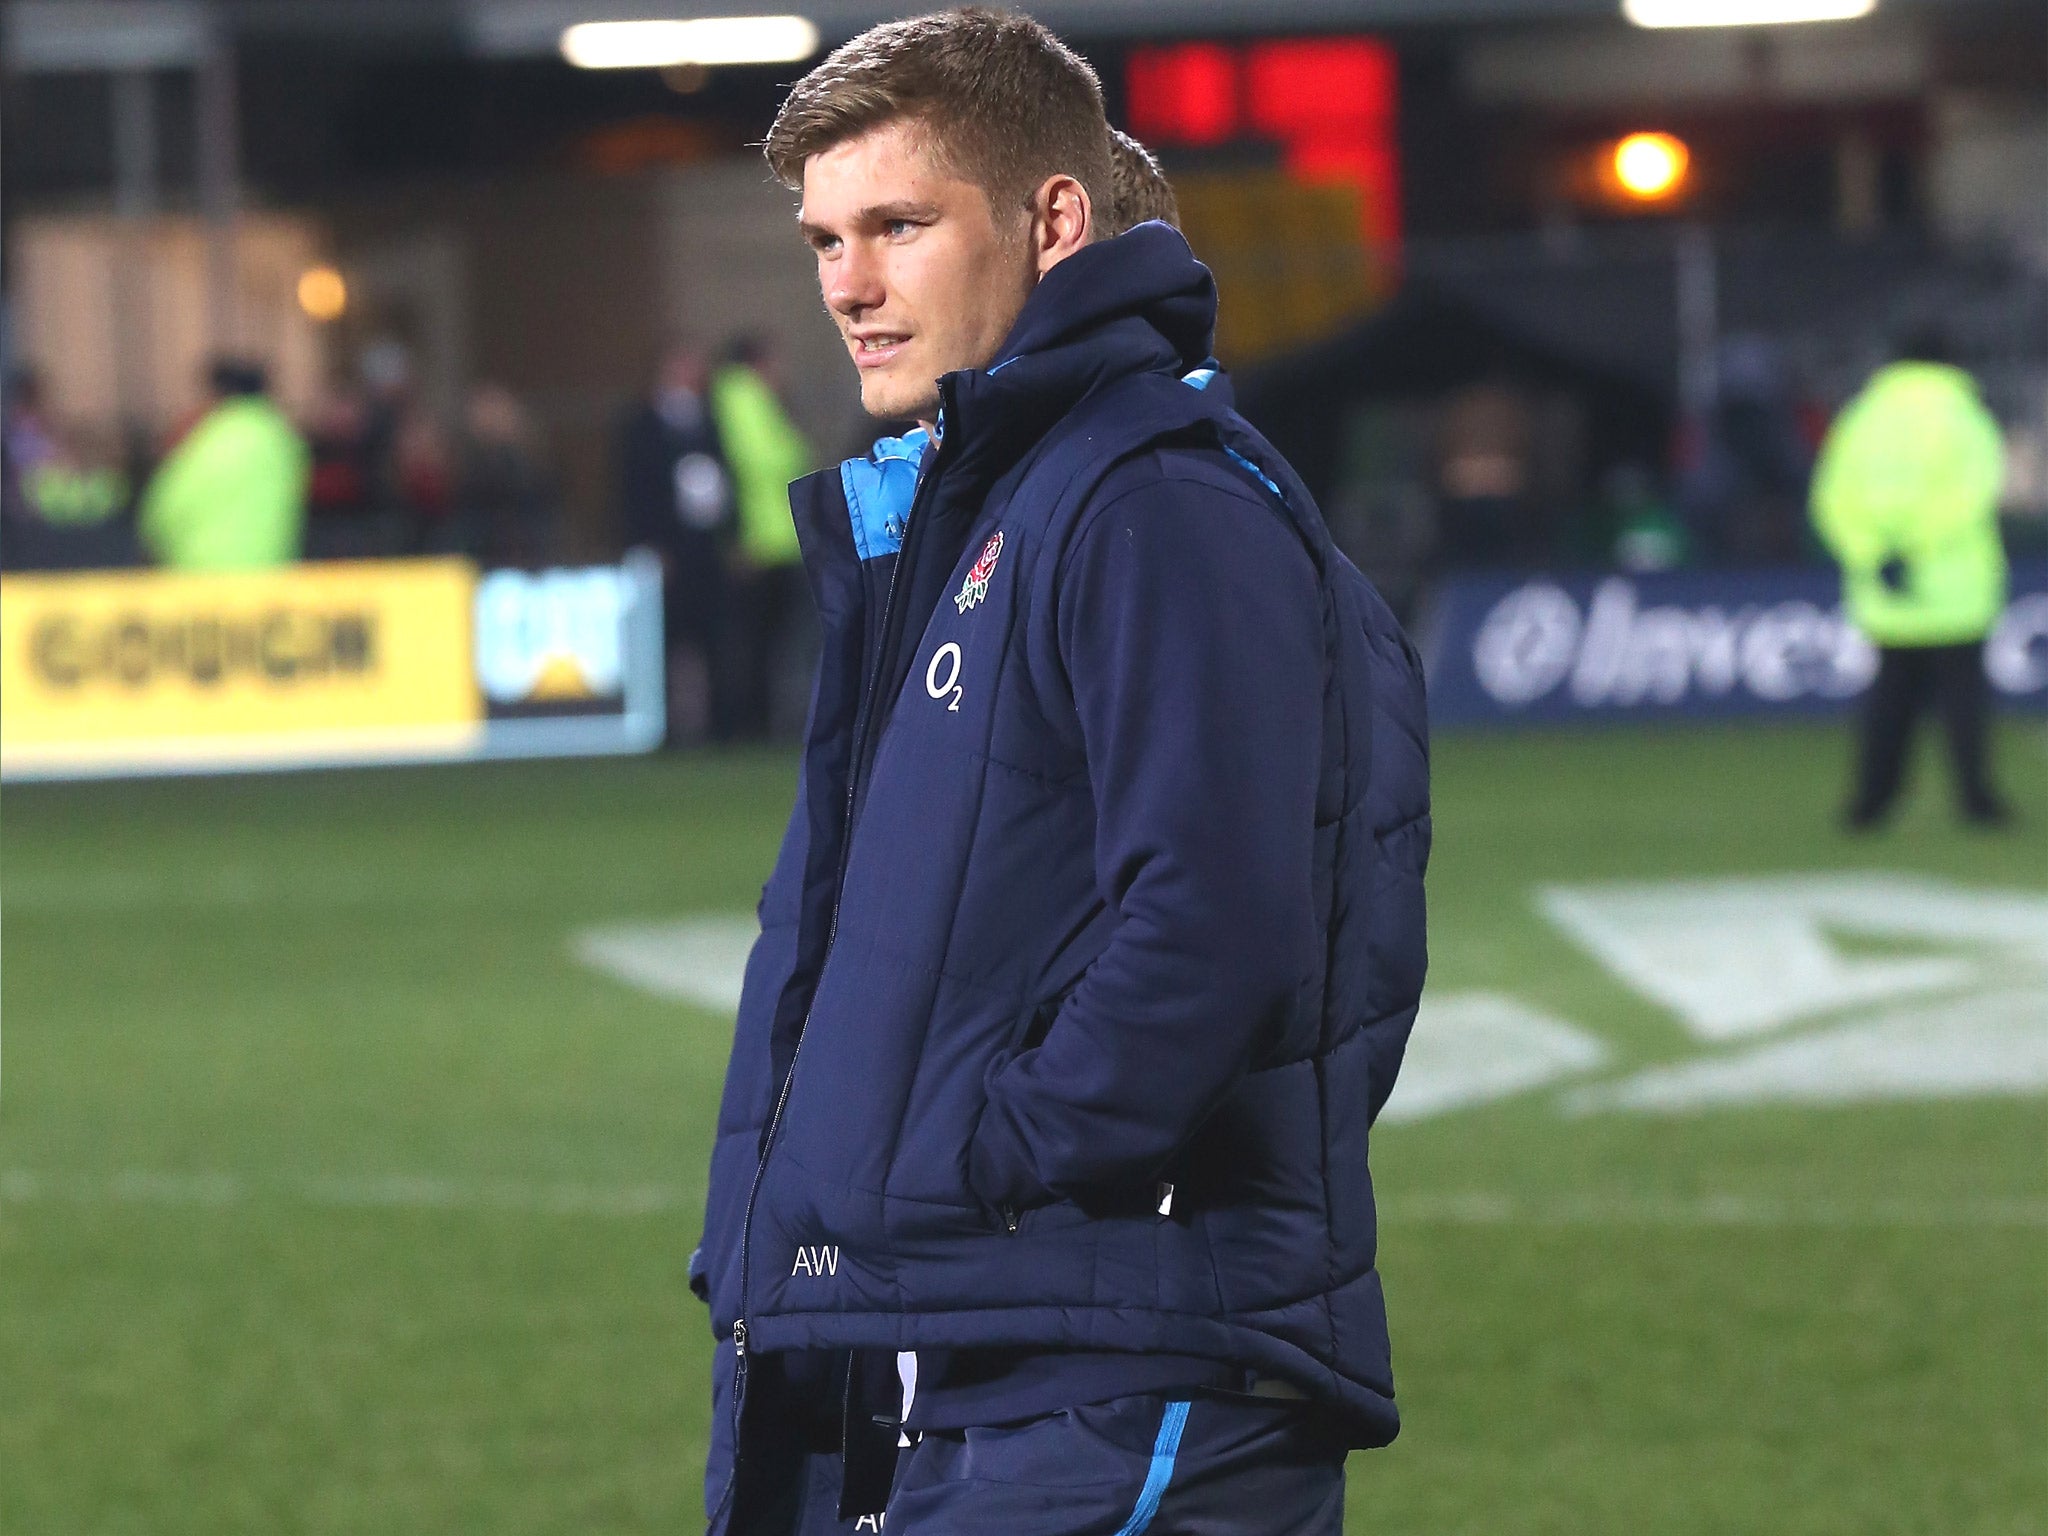 Owen Farrell has failed to recover from a knee-ligament strain picked up in the second Test